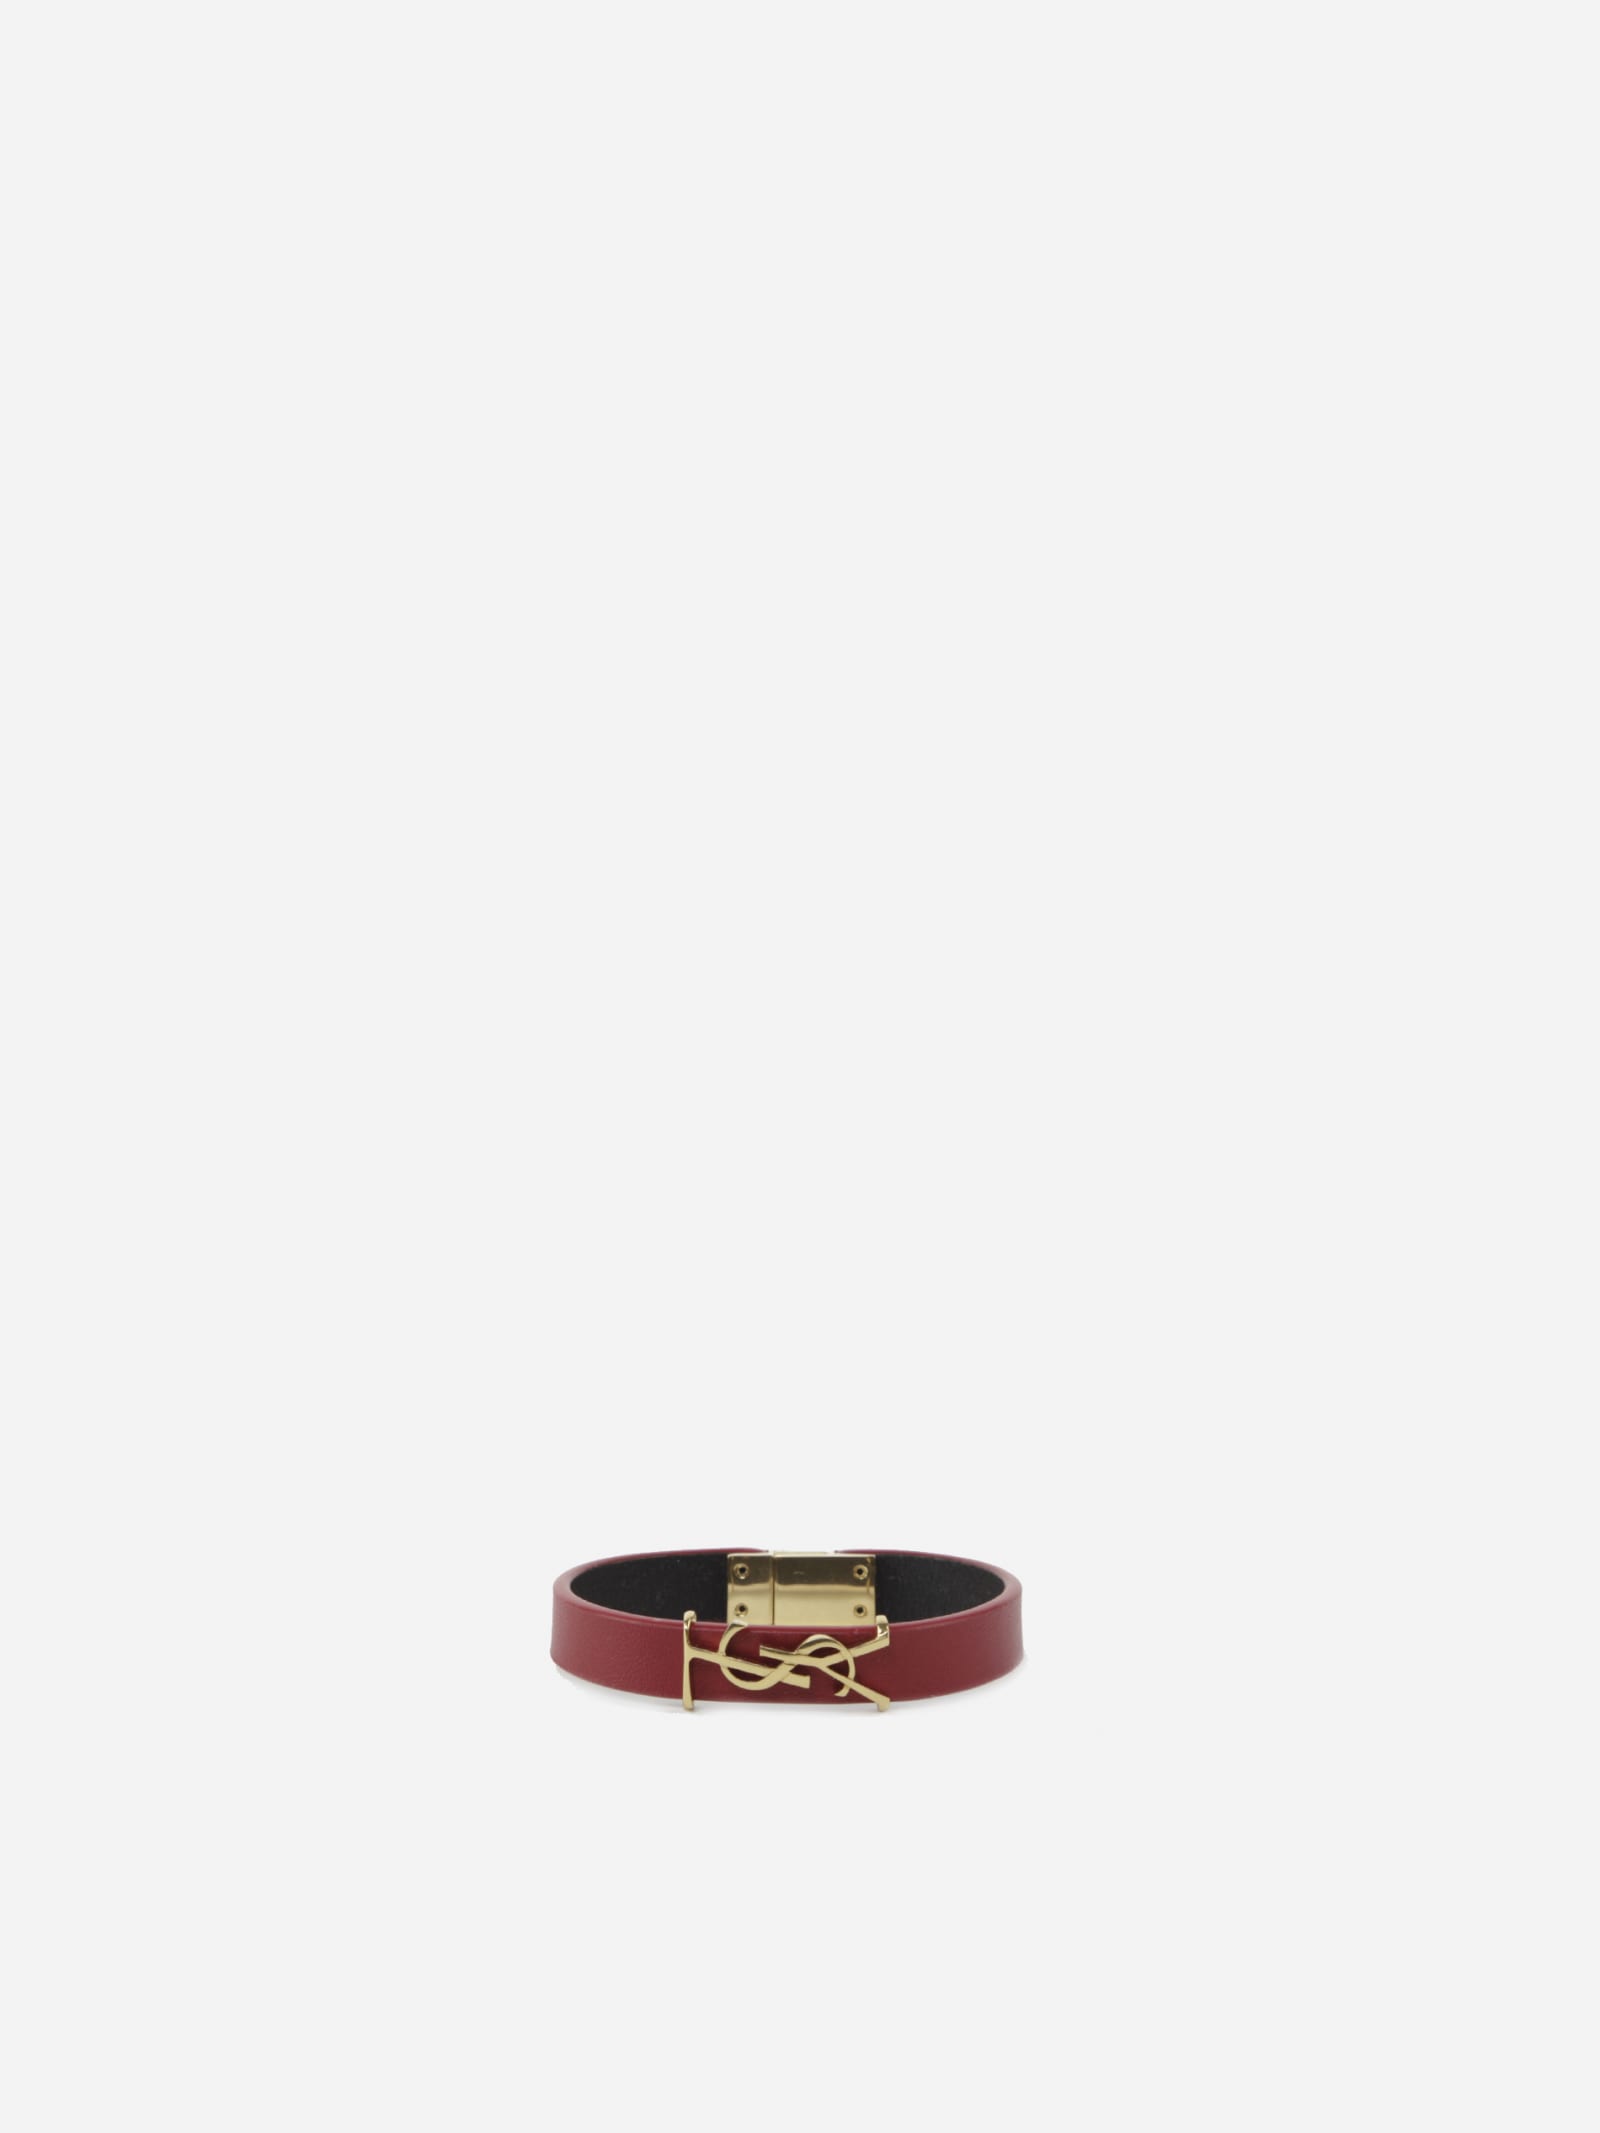 Saint Laurent Opyum Bracelet In Smooth Red Leather